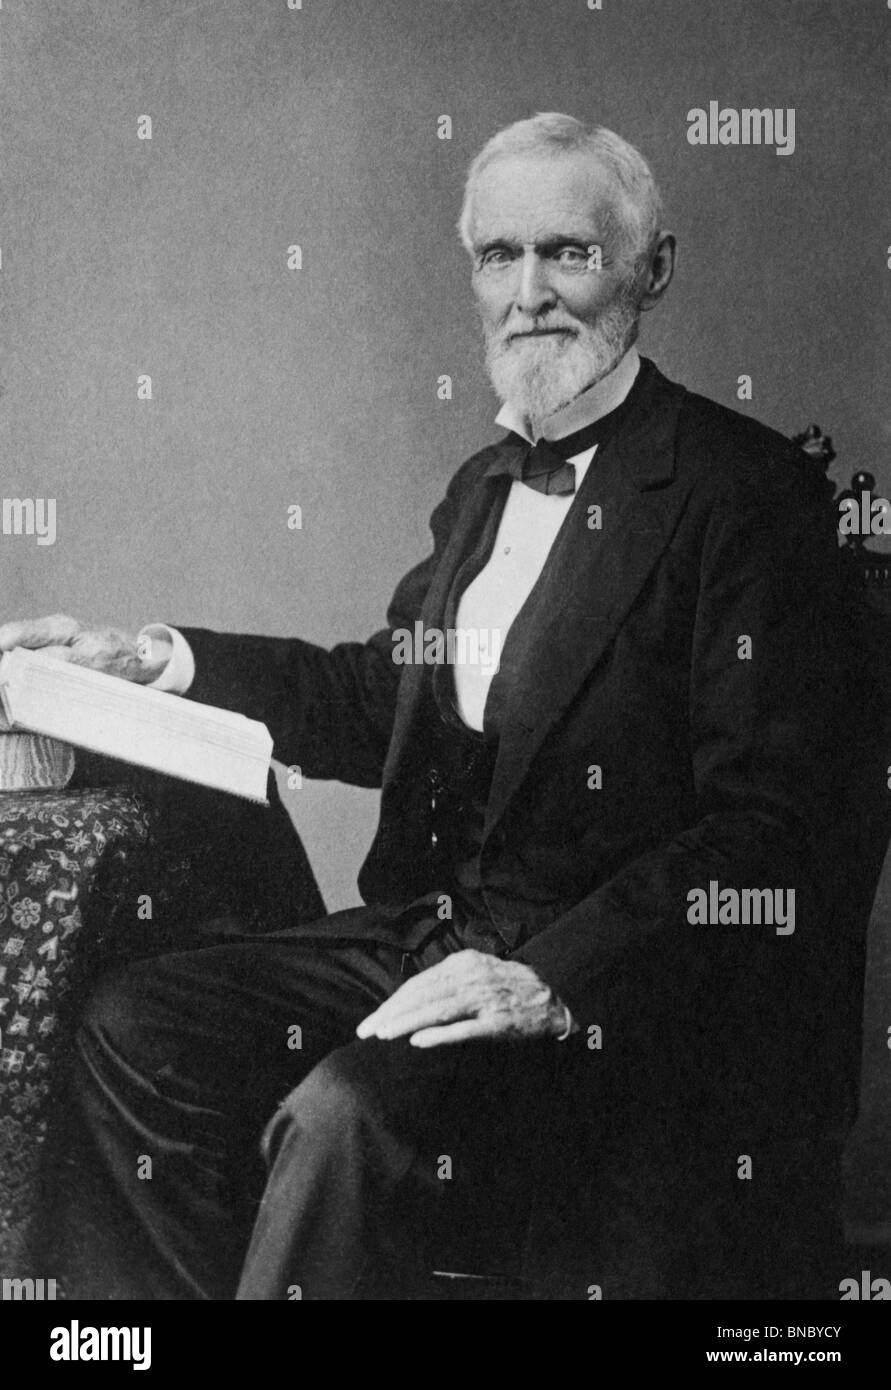 Portrait photo circa 1880s of Jefferson Davis (1808 - 1889) - President of the Confederate States of America from 1861 to 1865. Stock Photo